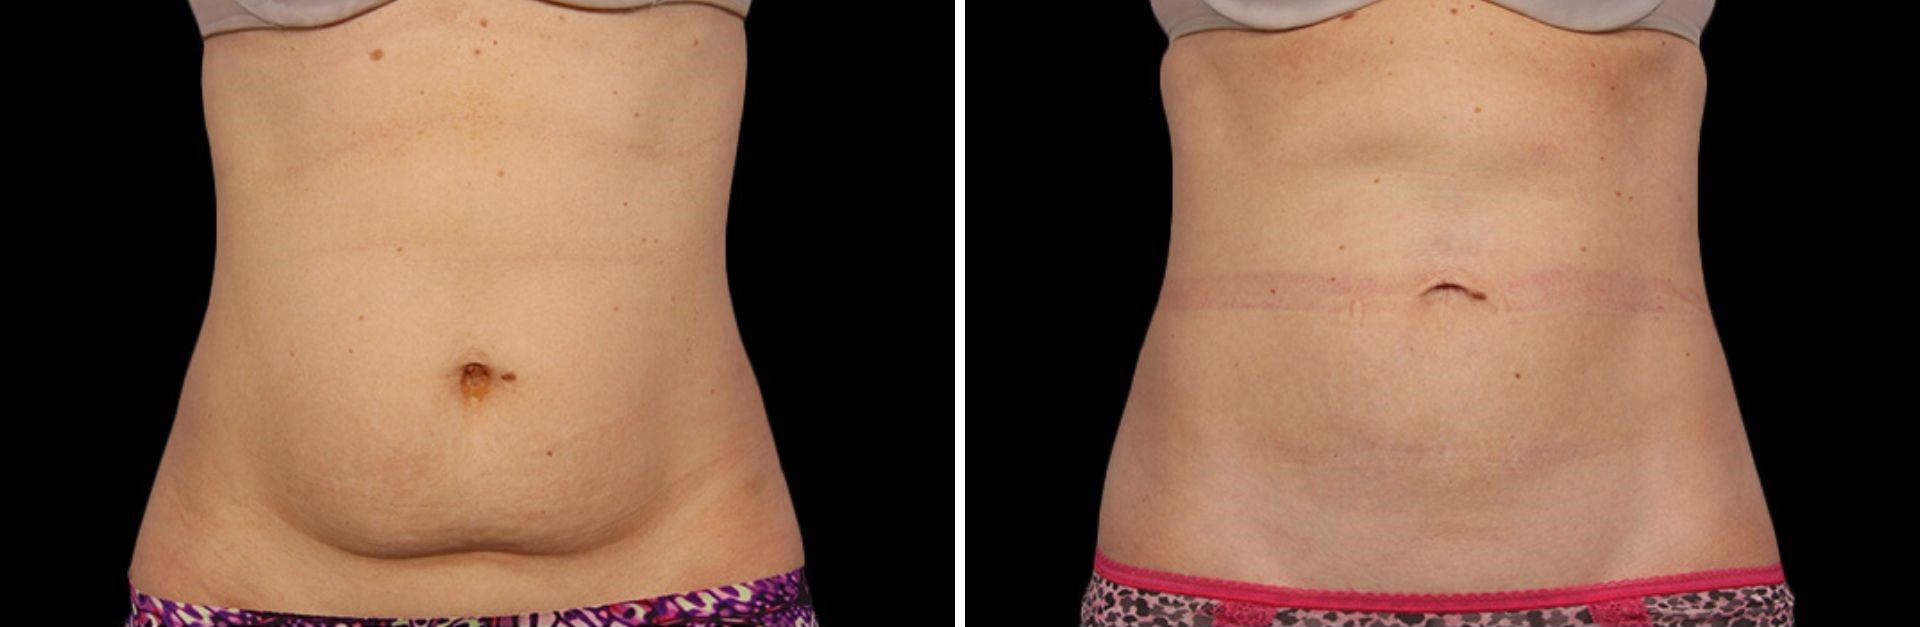 Real Results of Coolsculpting (Before/After Photos) - NOVA Plastic